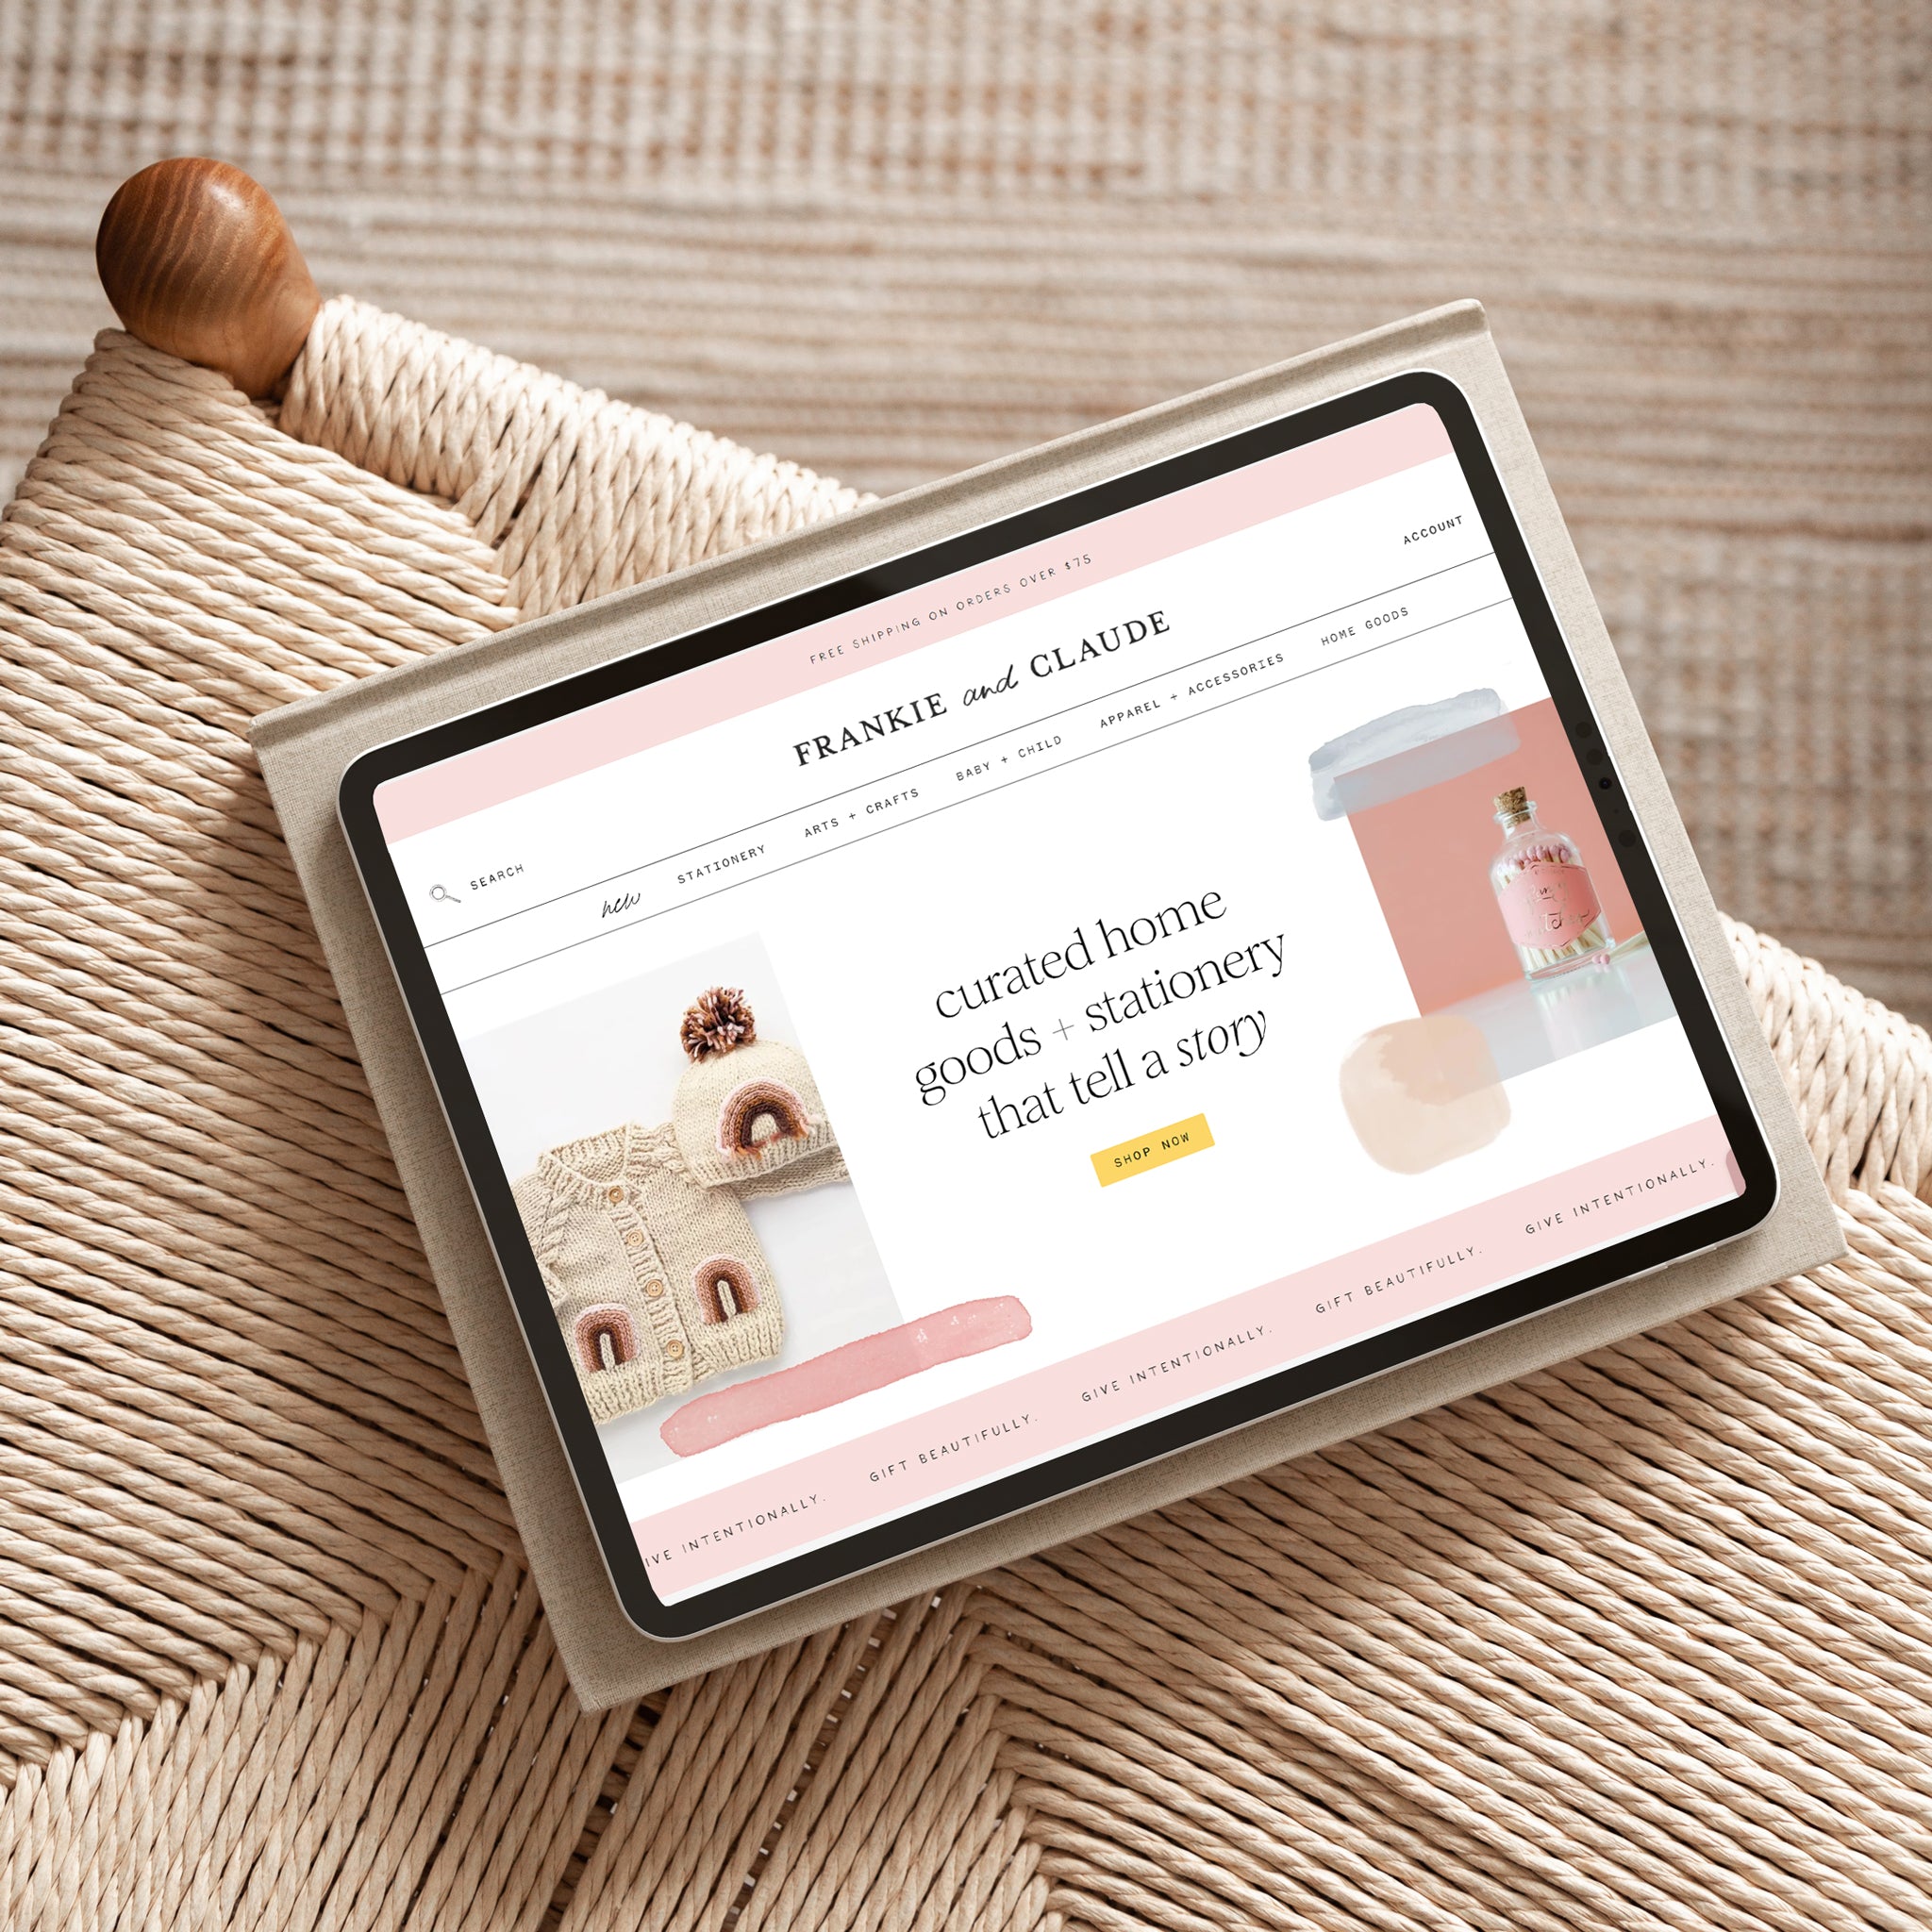 Shopify online store example for Frankie and Claude brand showing curated home goods and stationery on a tablet screen, illustrating successful small business e-commerce website design.